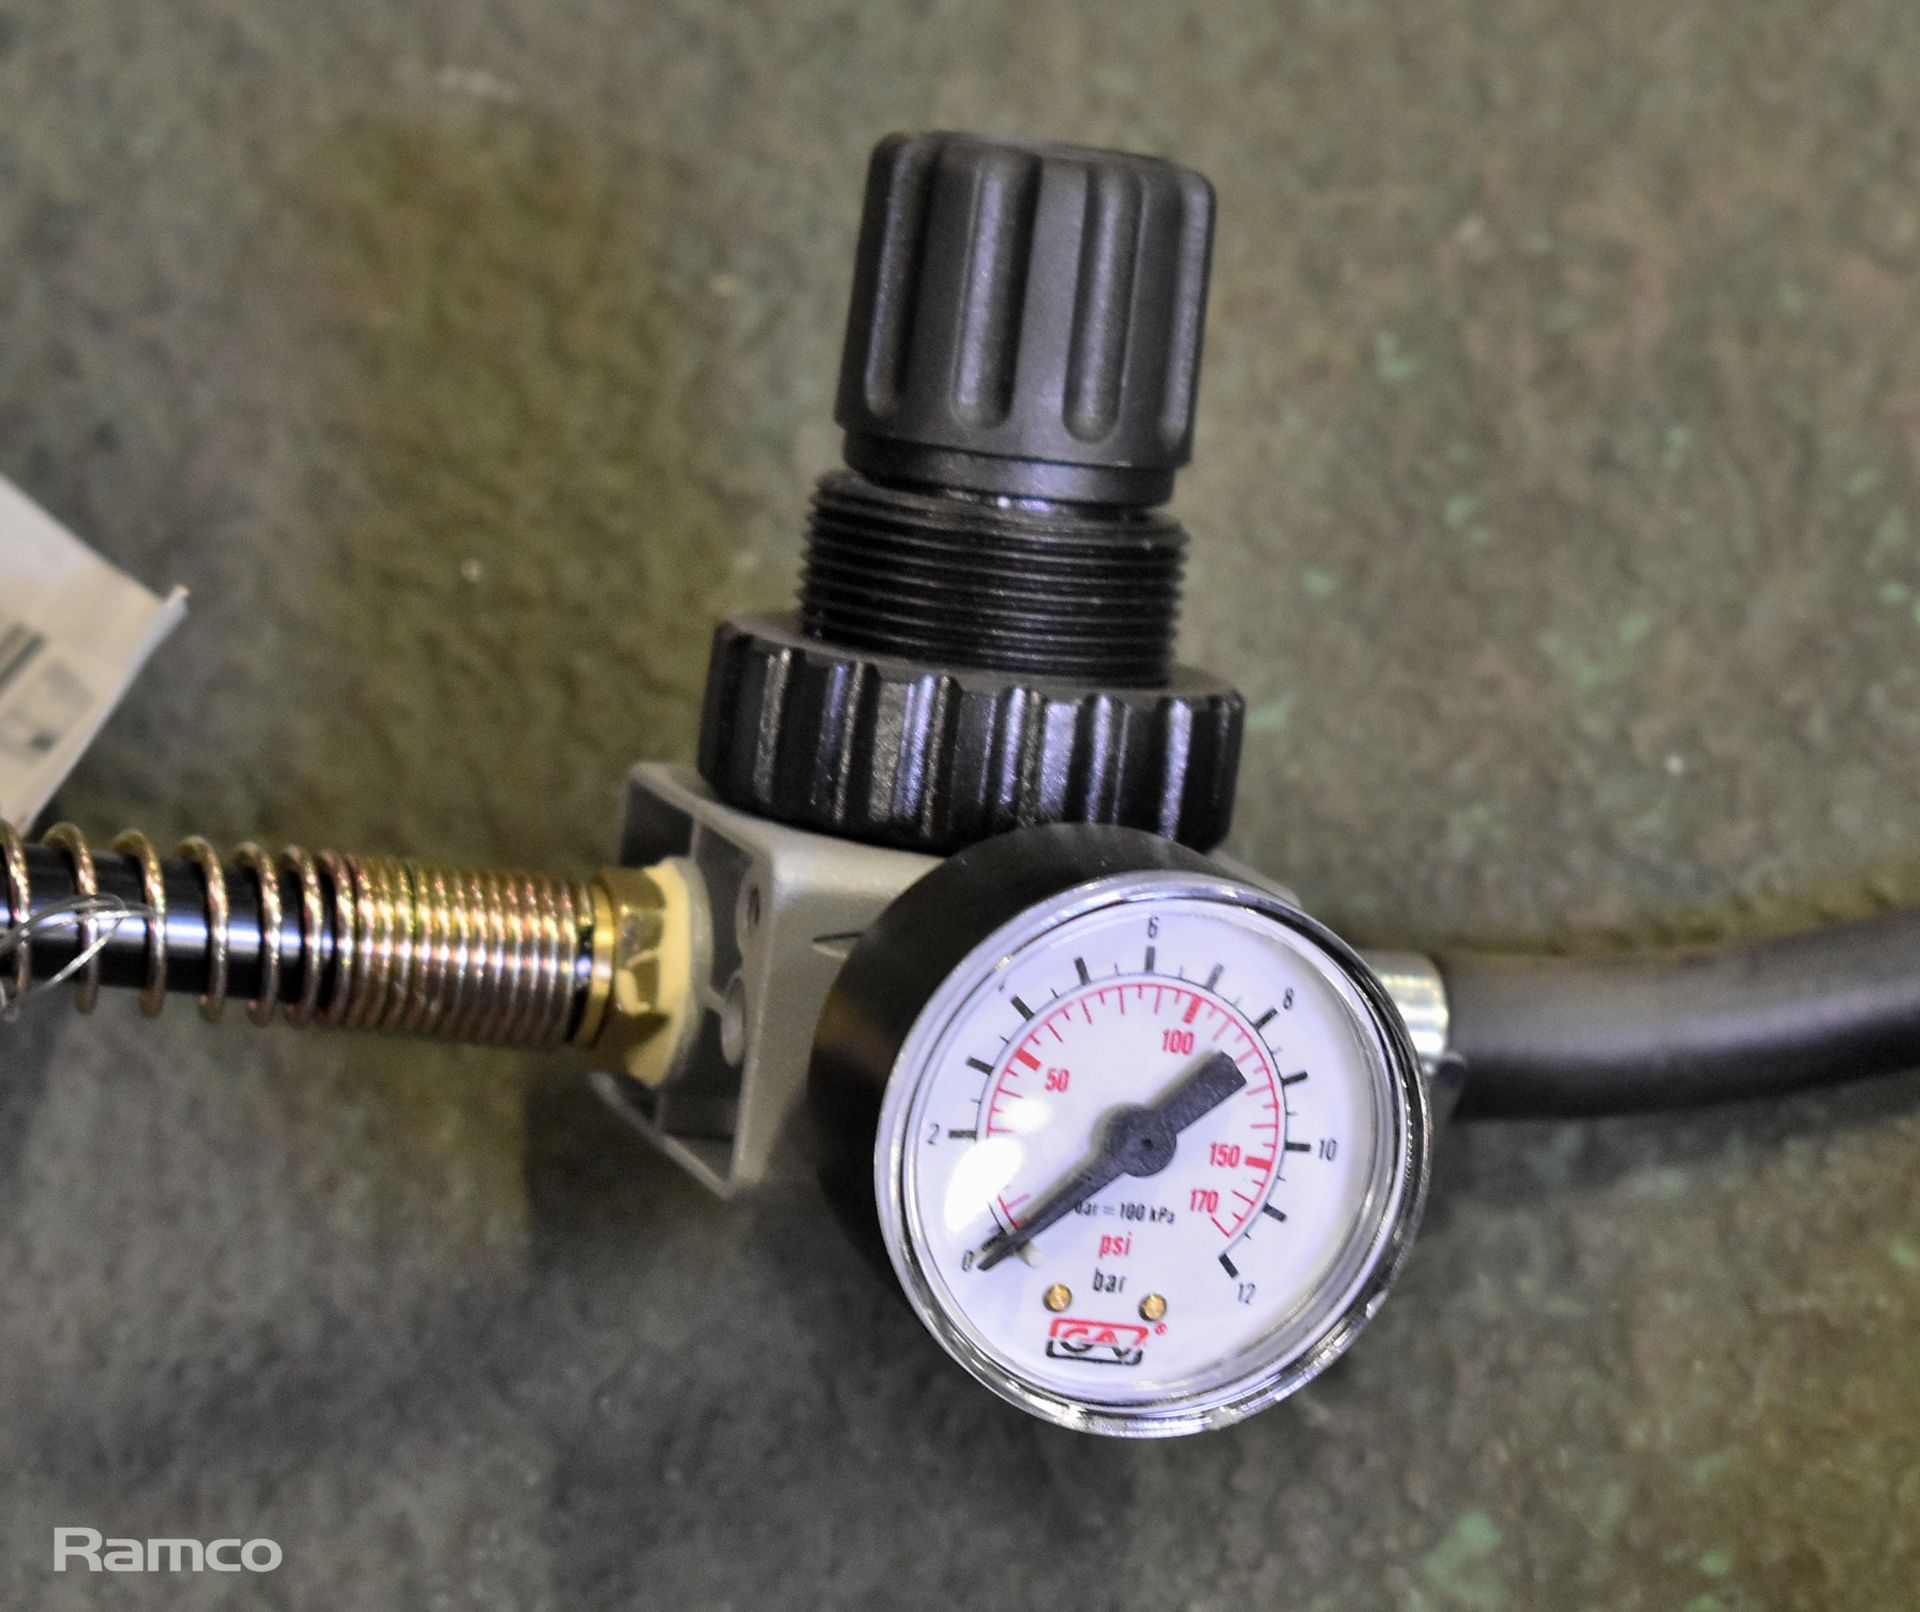 2x 1/4 inch air hose assembly with gauges, 1/4 inch air hose assembly - gauge missing screen - Image 2 of 4